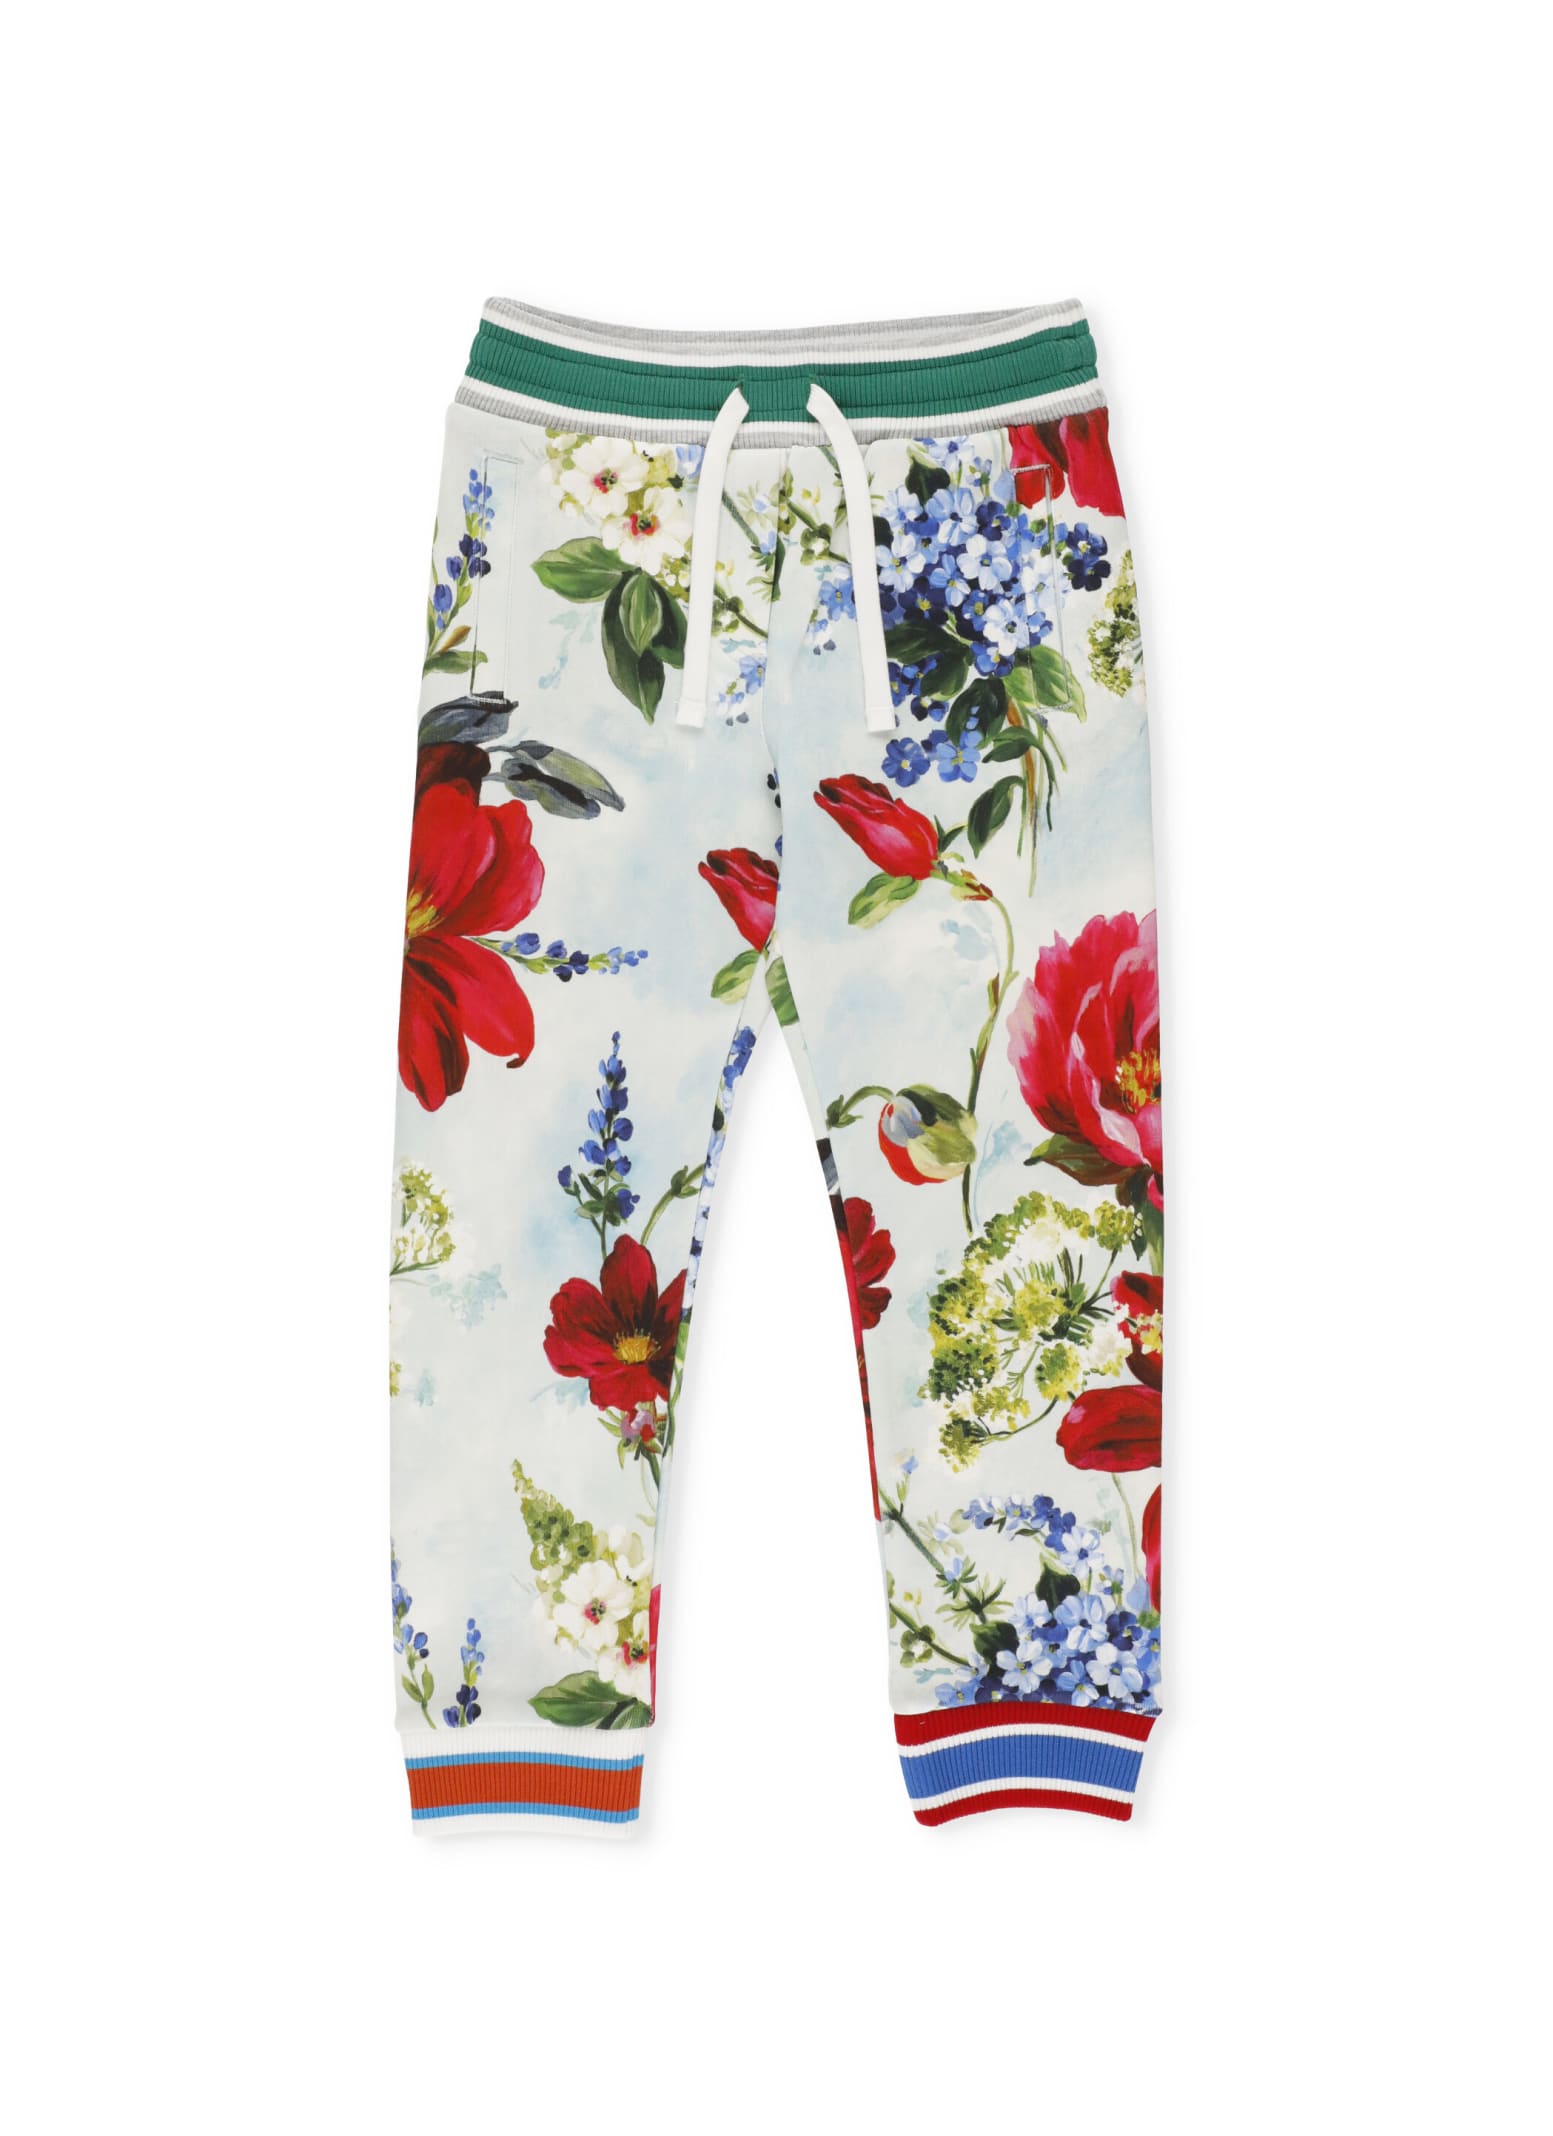 Dolce & Gabbana Floreal Trousers